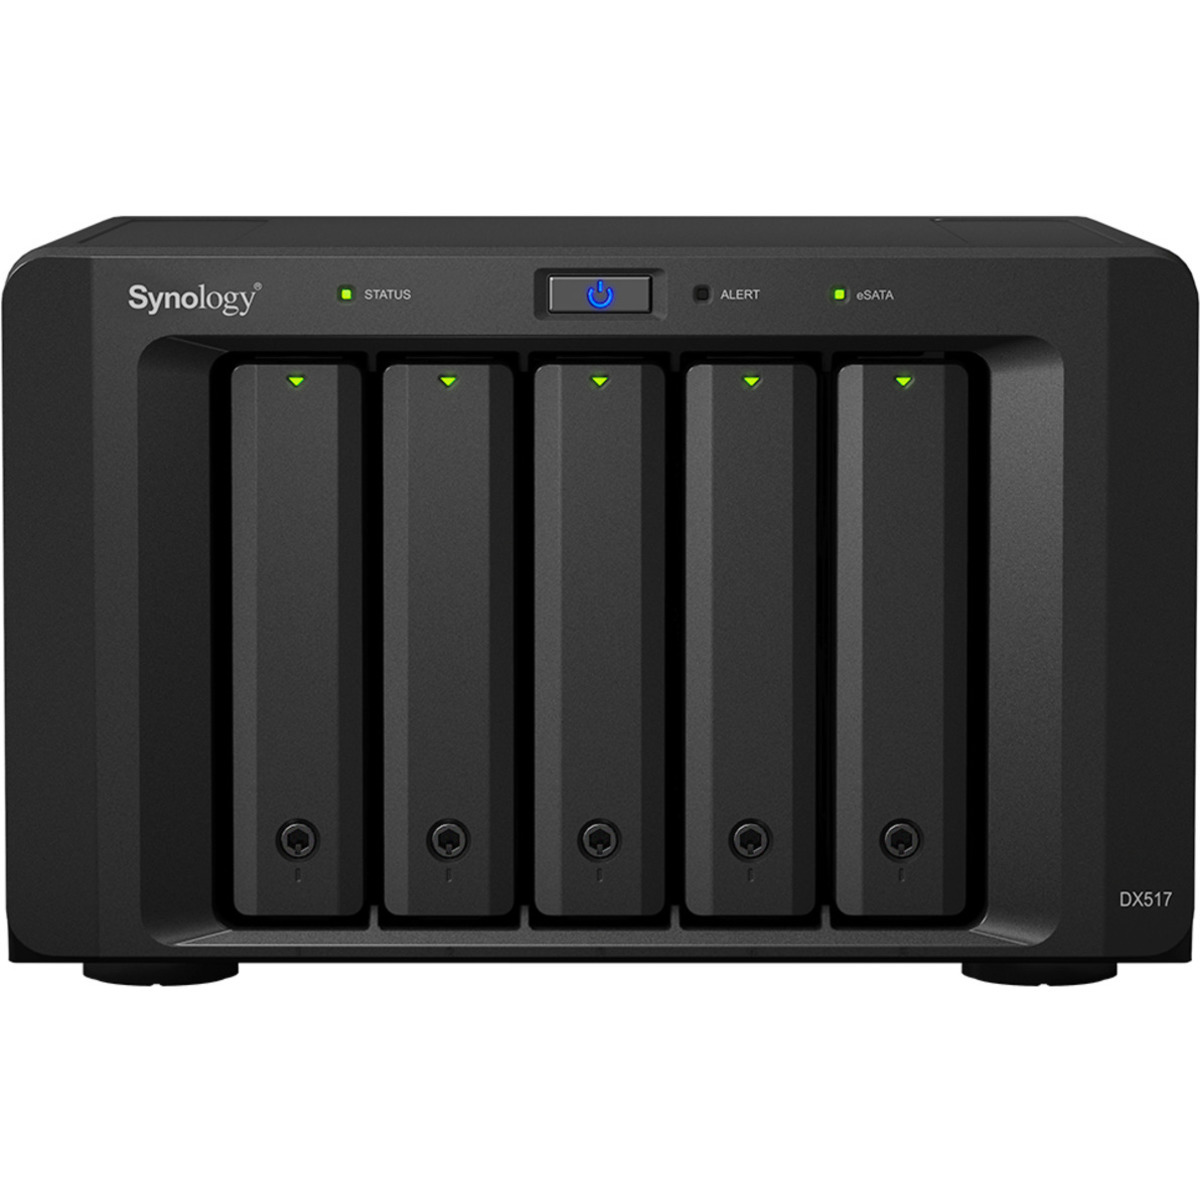 Synology DX517 External Expansion Drive 24tb 5-Bay Desktop Multimedia / Power User / Business Expansion Enclosure 3x8tb Western Digital Ultrastar DC HC320 HUS728T8TALE6L4 3.5 7200rpm SATA 6Gb/s HDD ENTERPRISE Class Drives Installed - Burn-In Tested DX517 External Expansion Drive